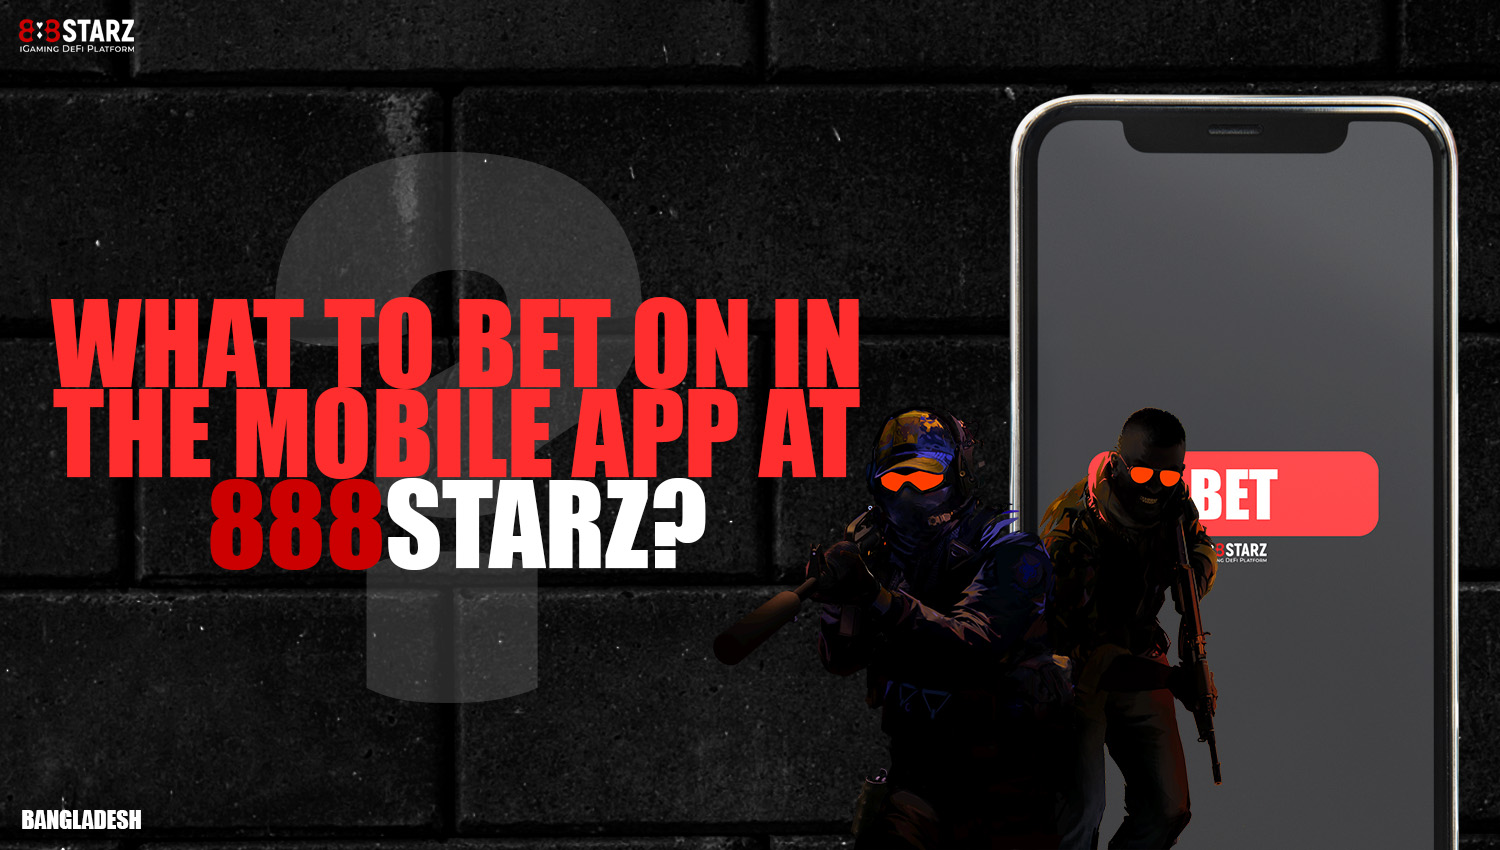 Find out what you can bet on in the 888starz mobile app